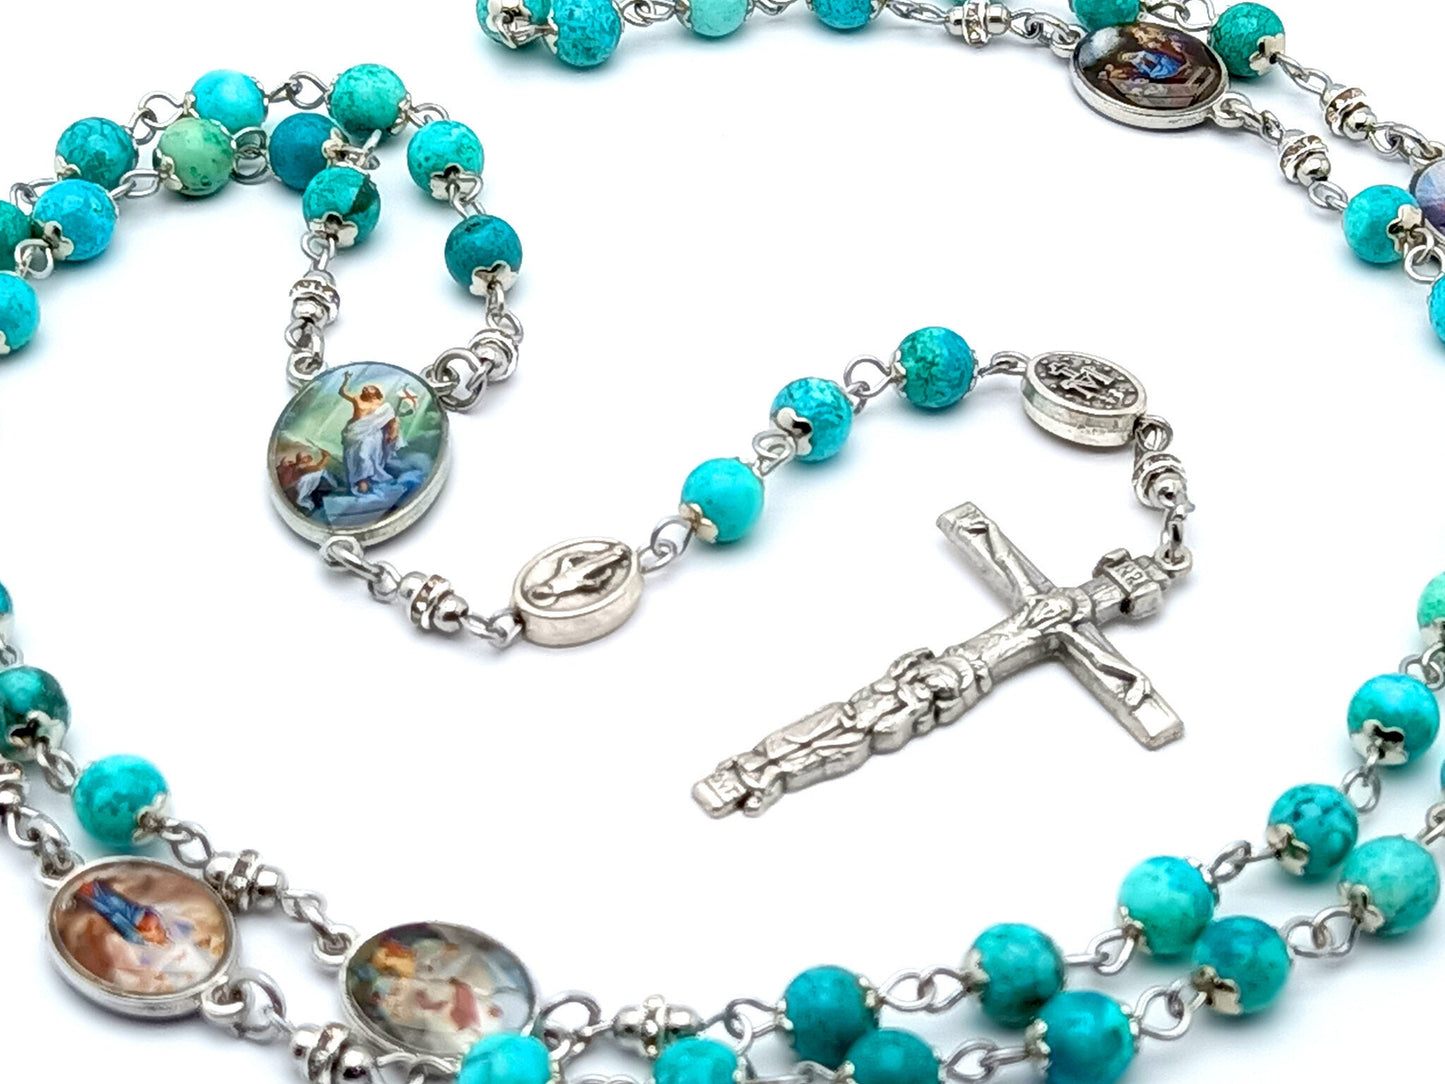 Joyful Mysteries unique rosary beads with turquoise gemstone beads and picture linking beads, silver crucifix and picture centre medal.